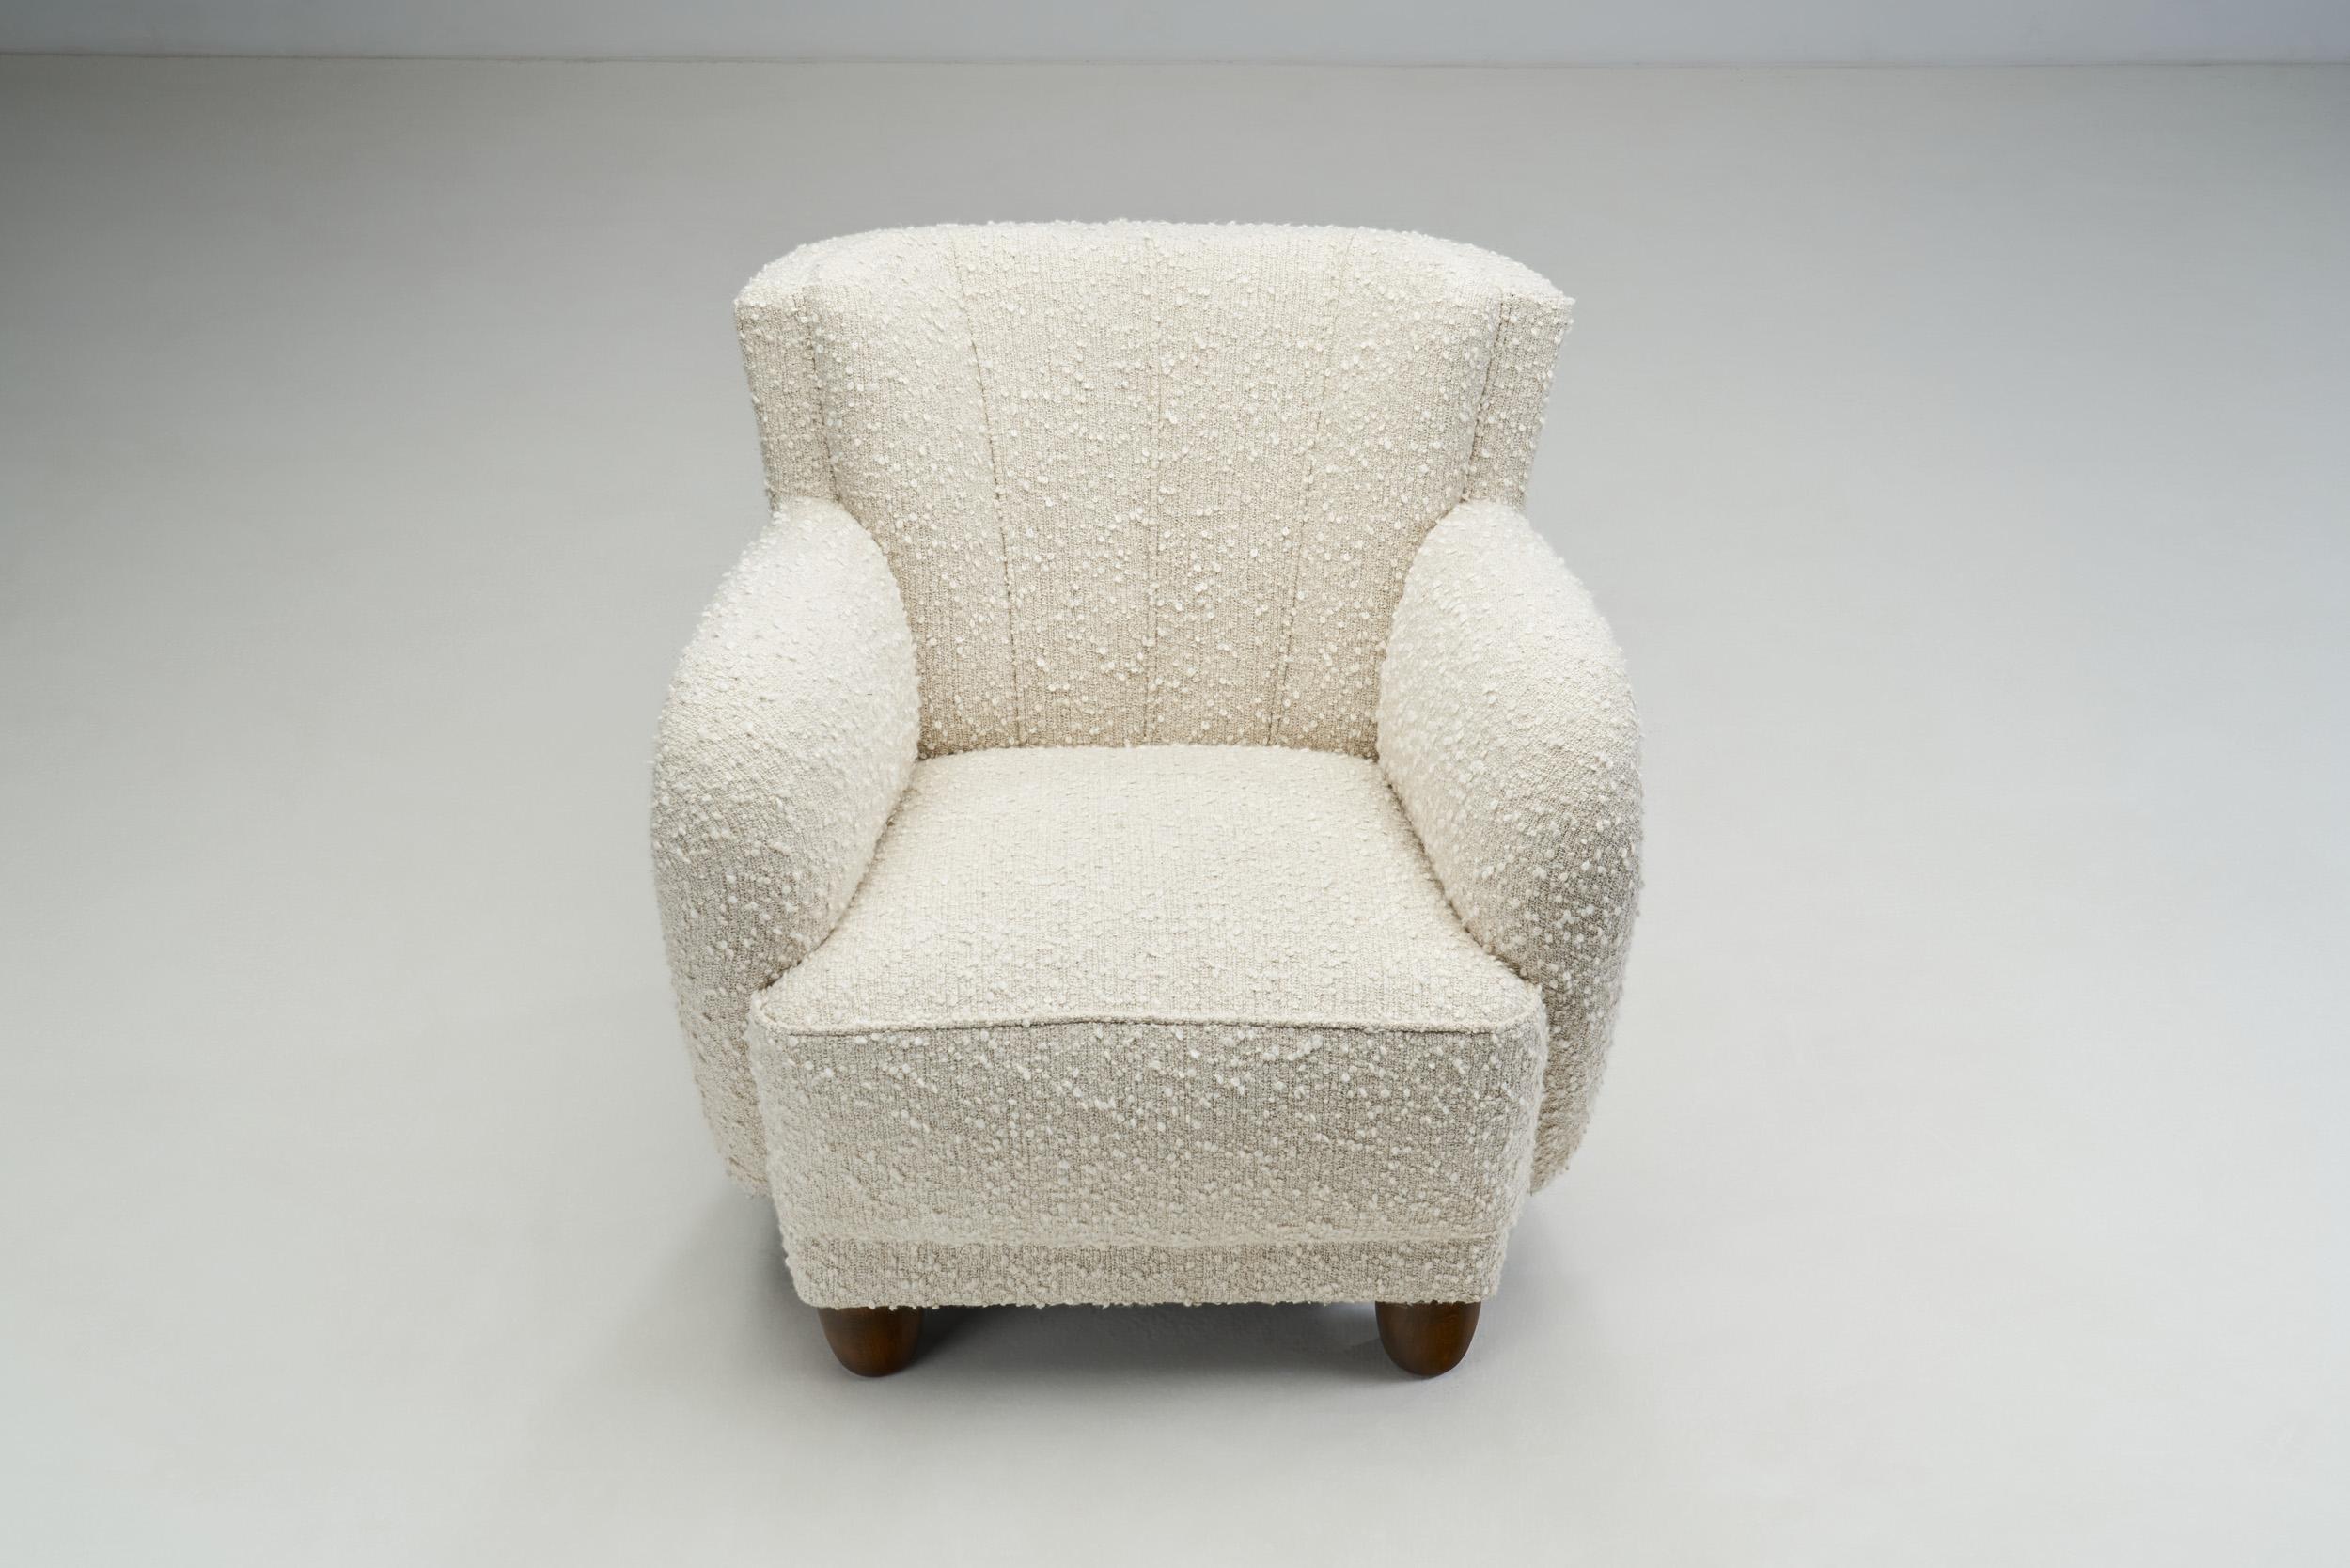 Fabric Danish Armchair with Stained Wood Legs and Bouclé Upholstery, Denmark, 1940s